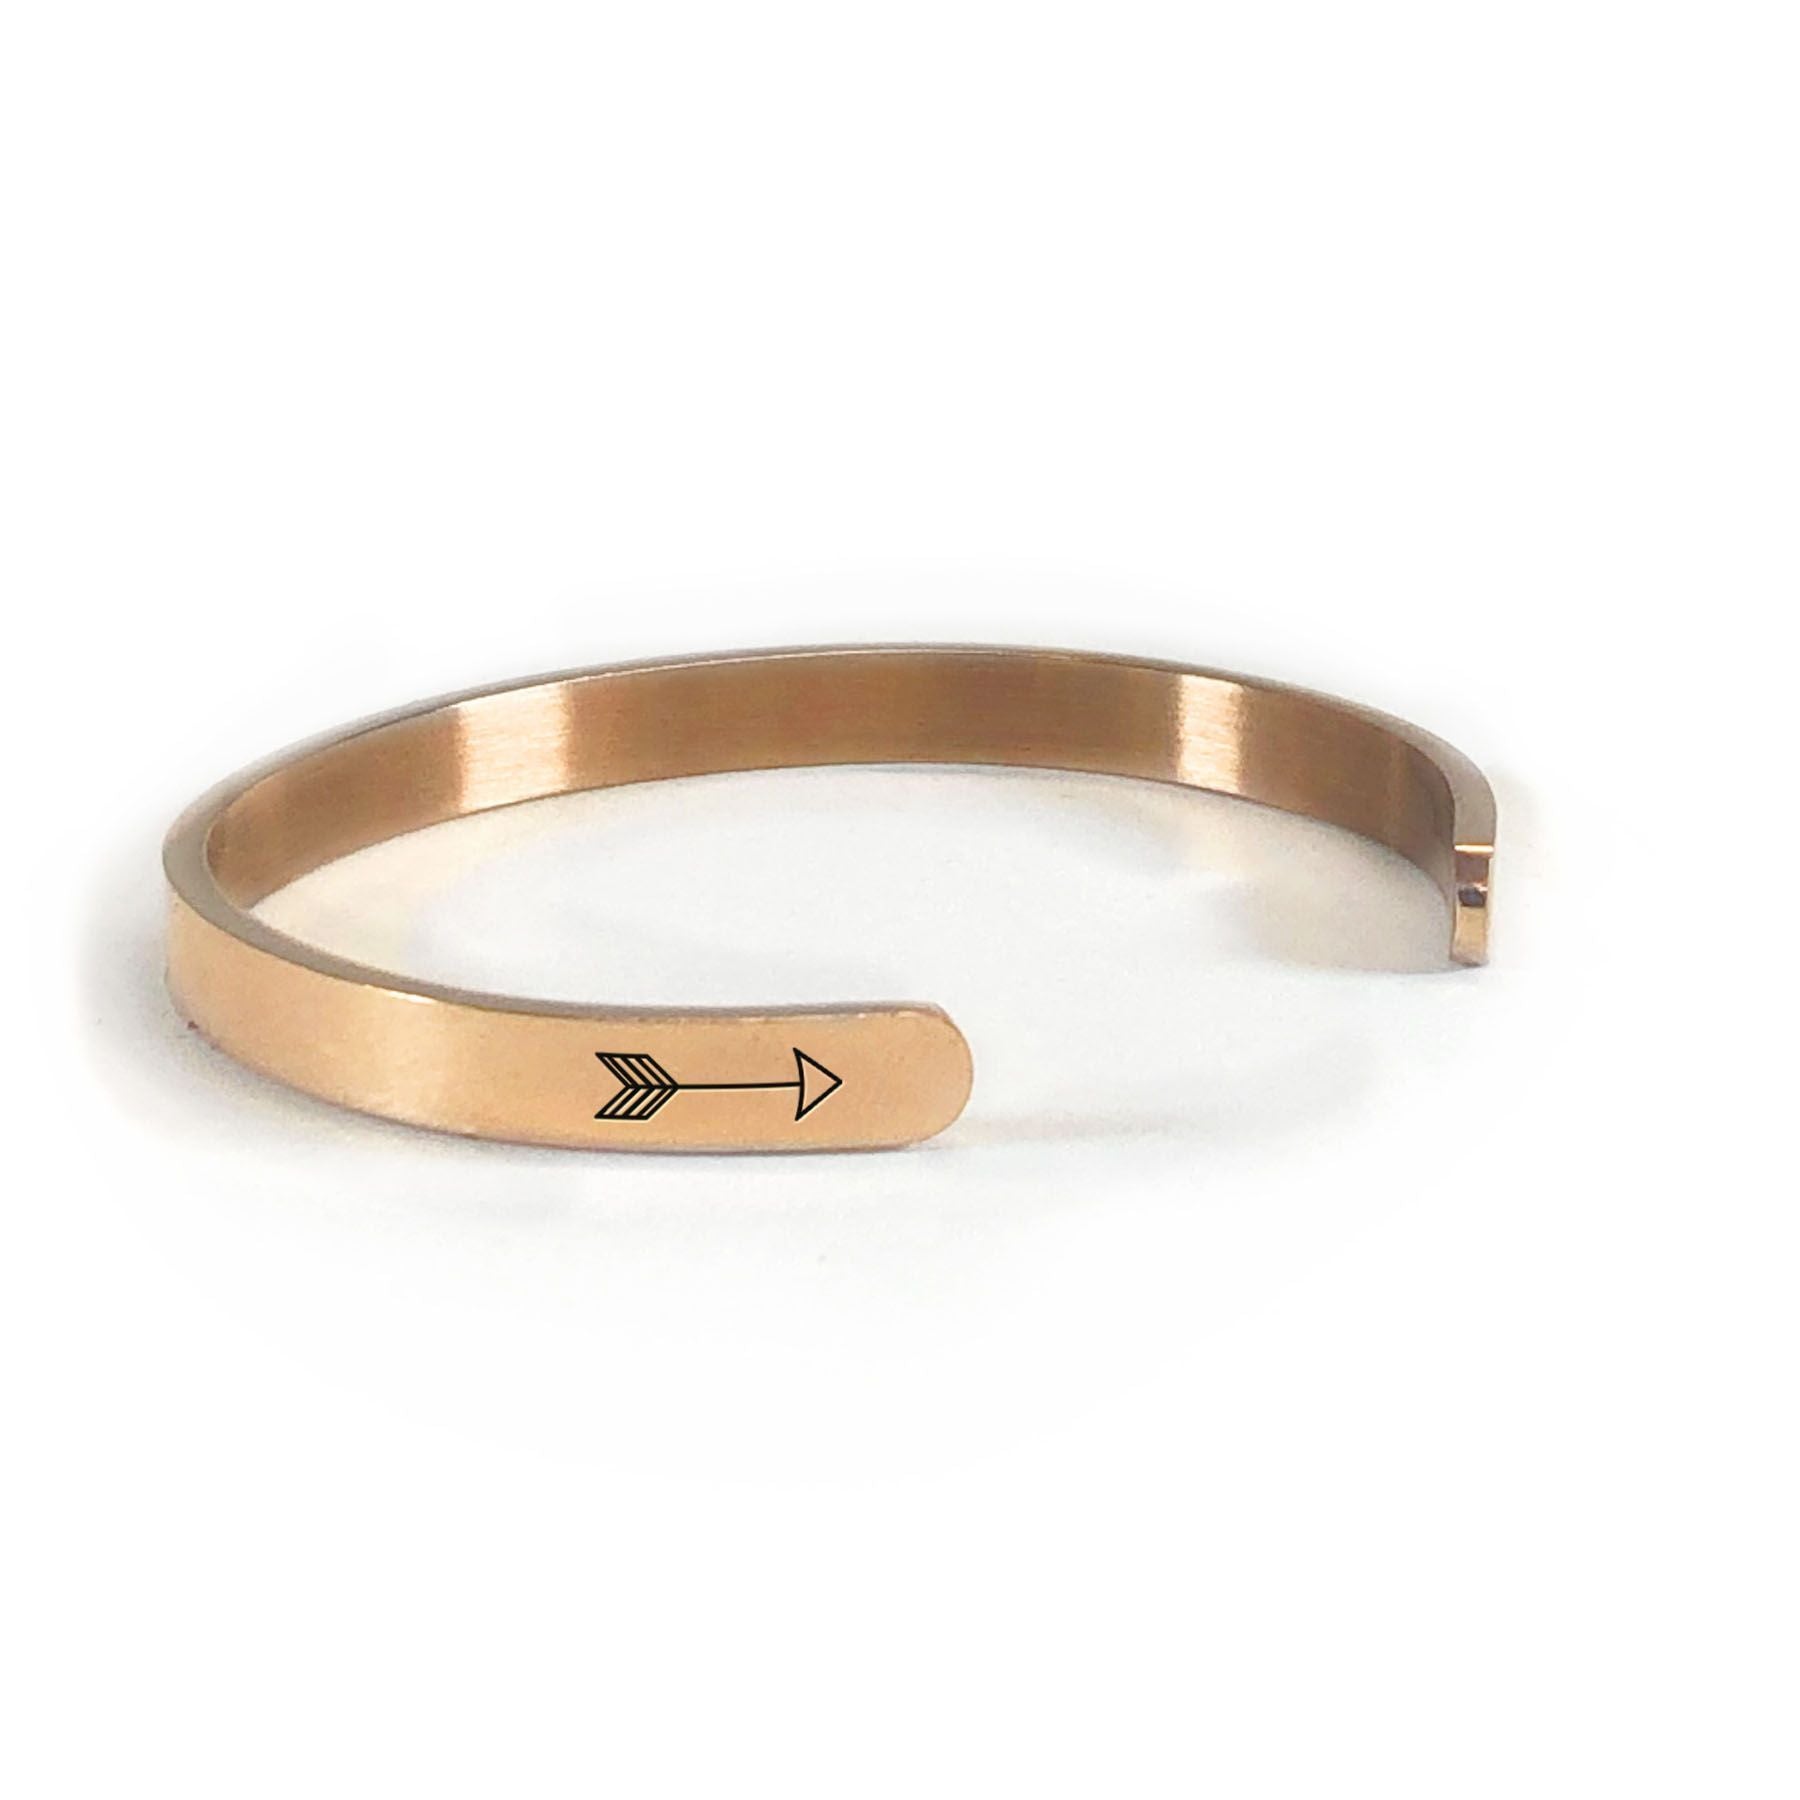 Ohana bracelet in rose gold rotated to show arrows and cuff opening